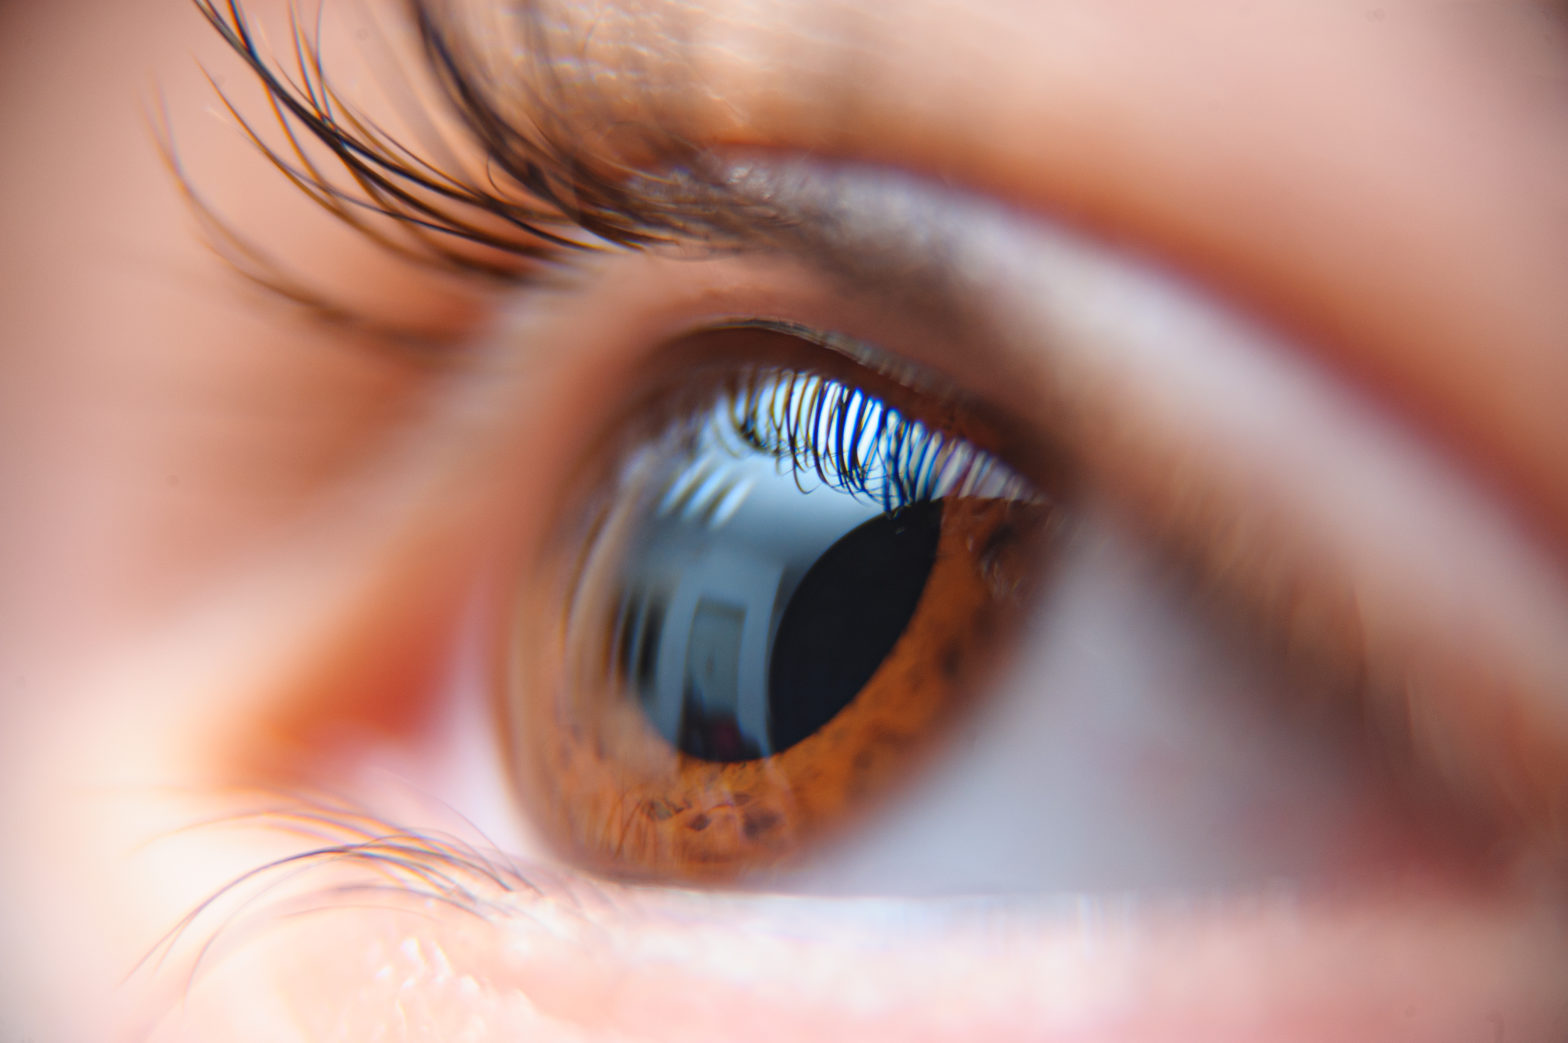 What You Need to Know About Corneal Abrasion